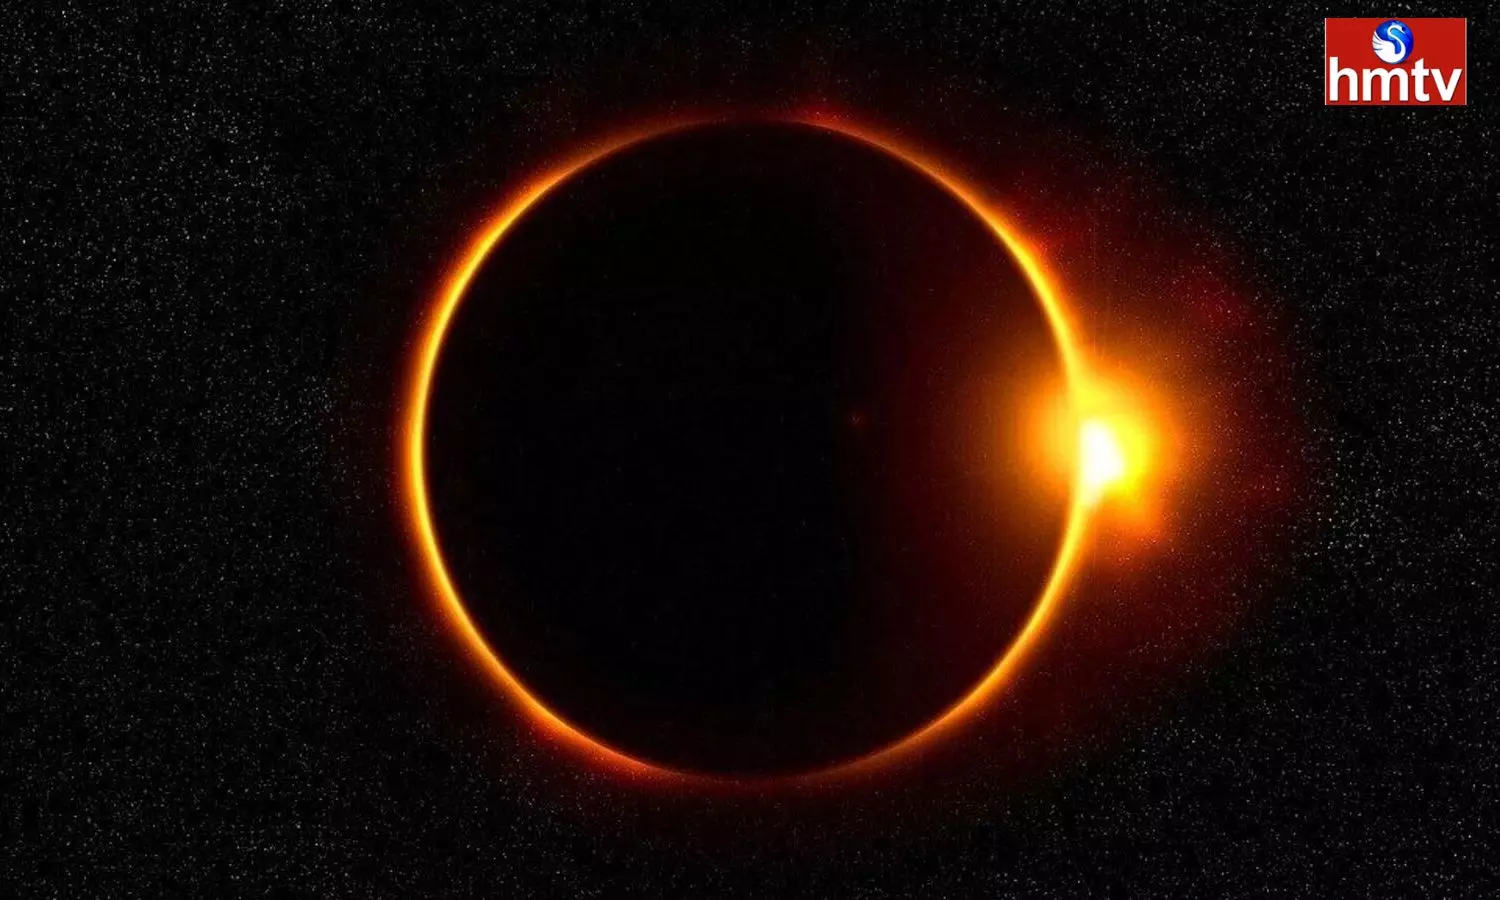 A solar Eclipse Will occur on April 8, 2024 find out which zodiac signs are affected